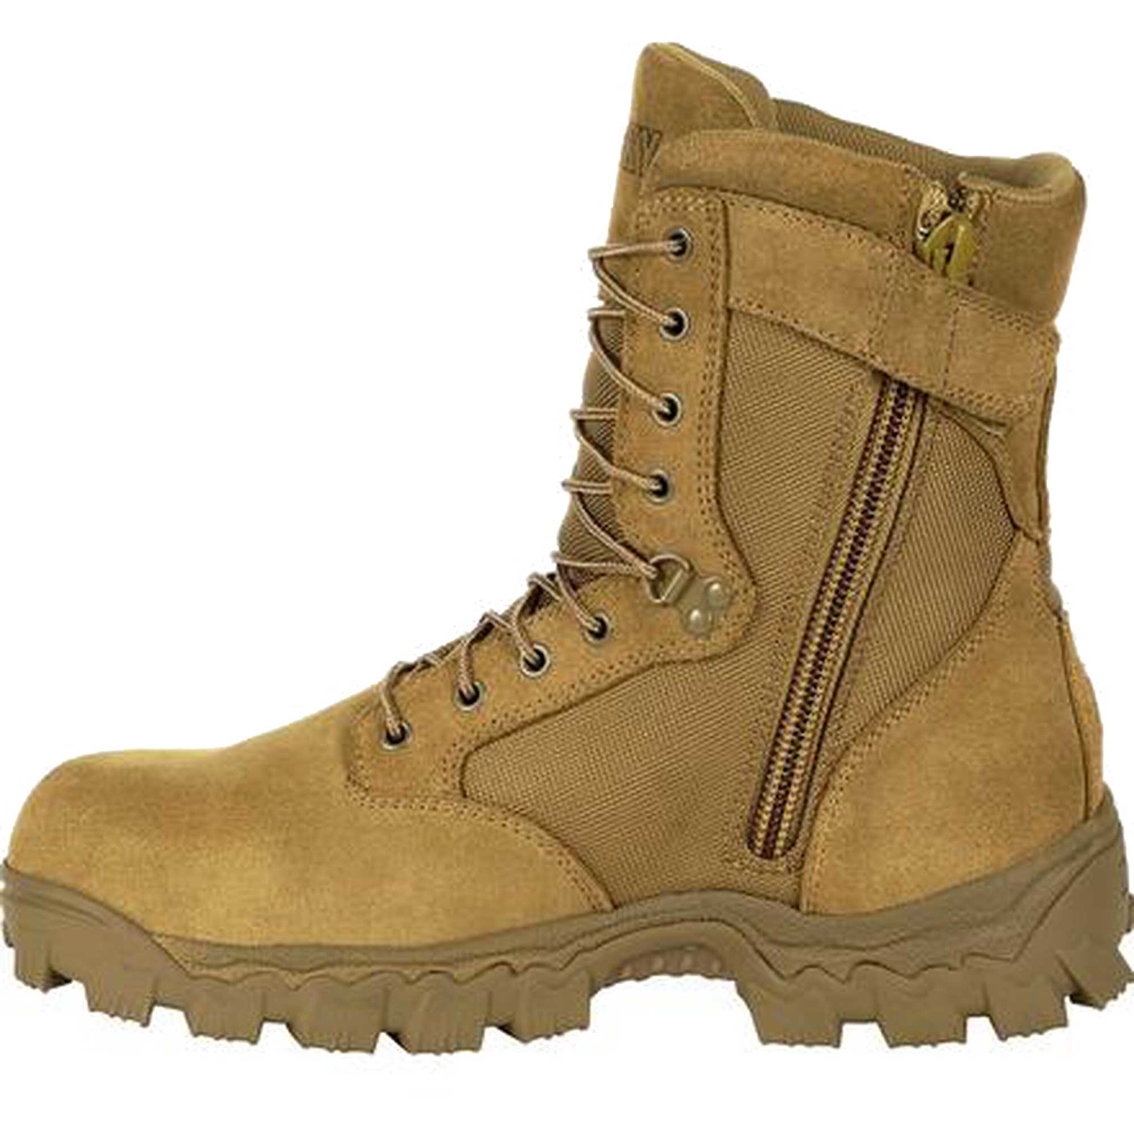 Rocky Alpha Force Duty Boots - Image 2 of 6